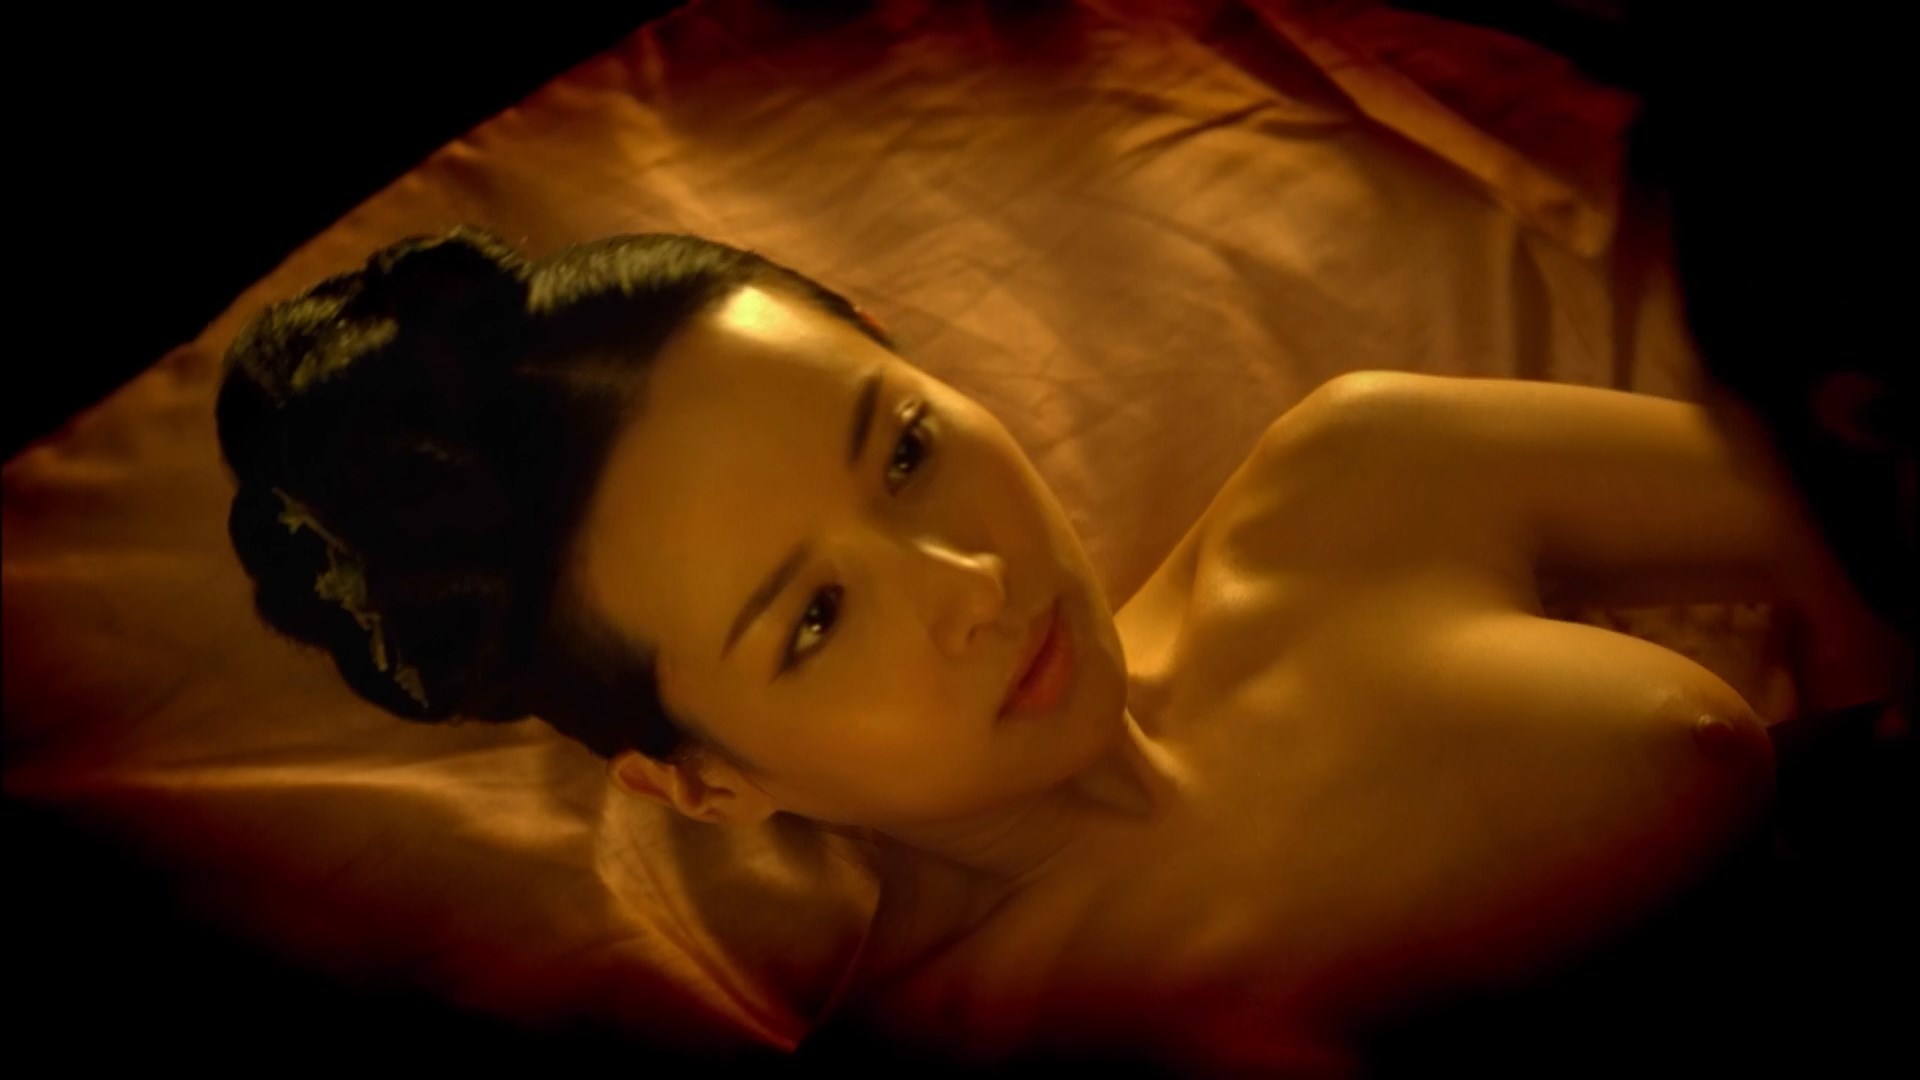 Nude Video Celebs Jo Yeo Jeong Nude The Concubine 2012 is top naked photo.....